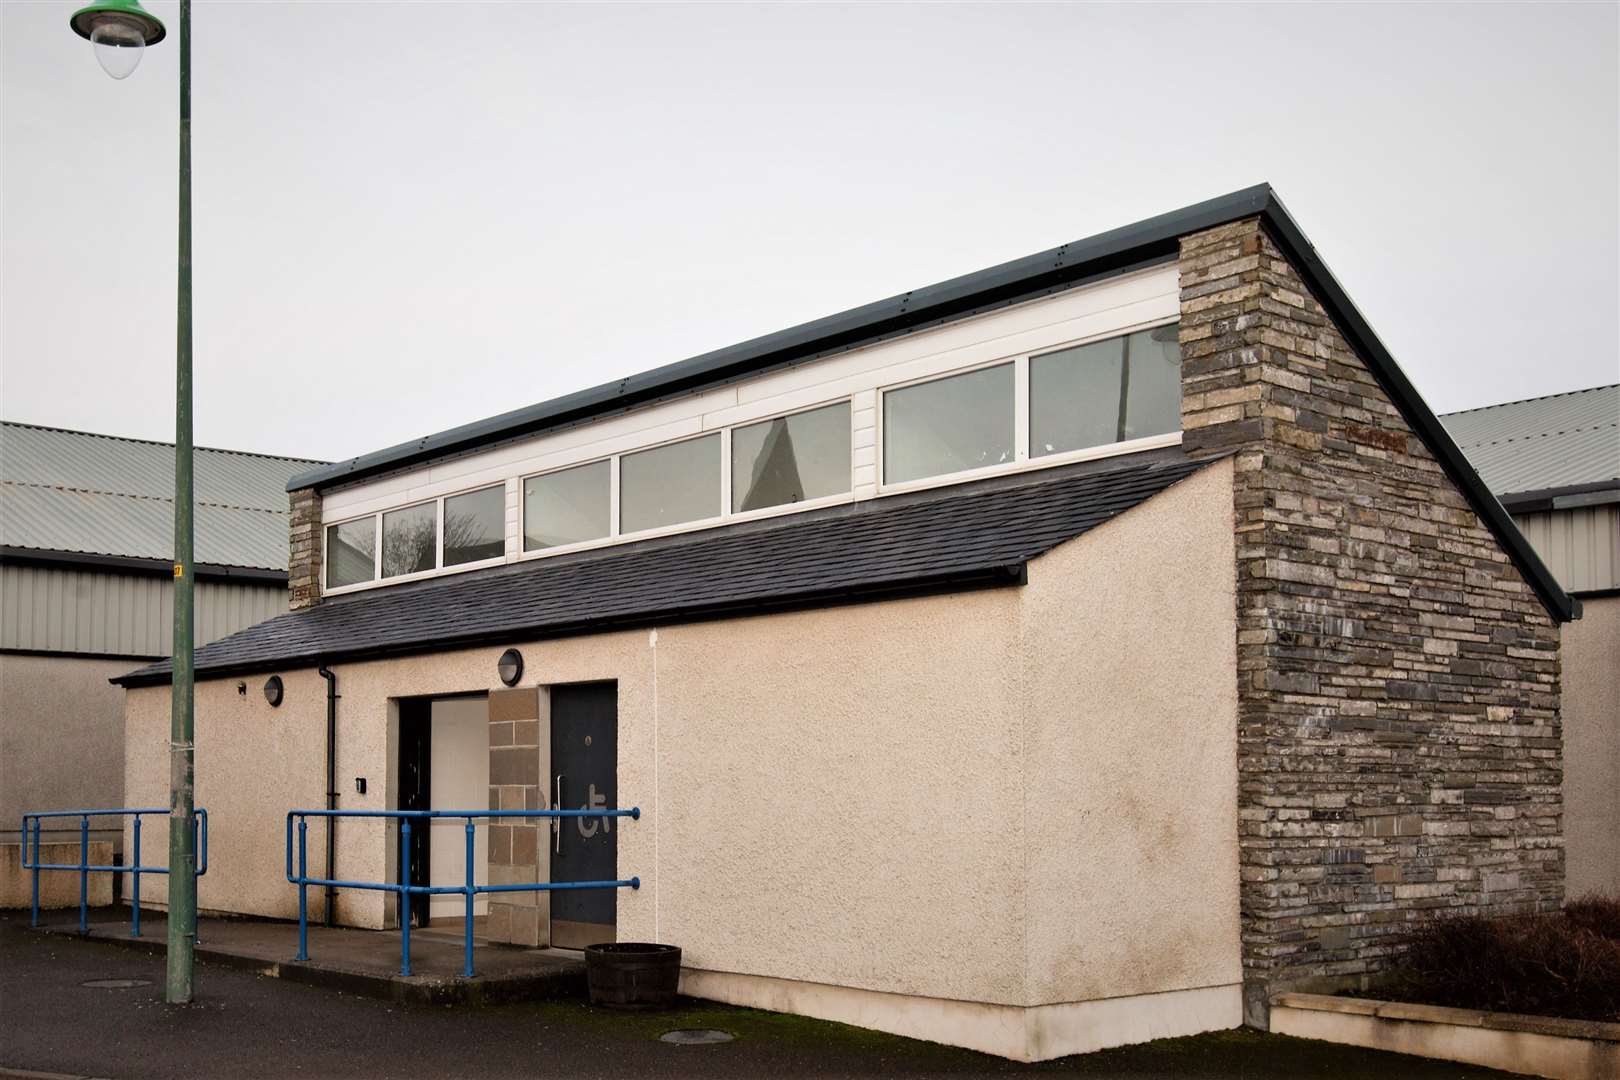 This public toilet in Thurso has been affected by vandalism in the past.